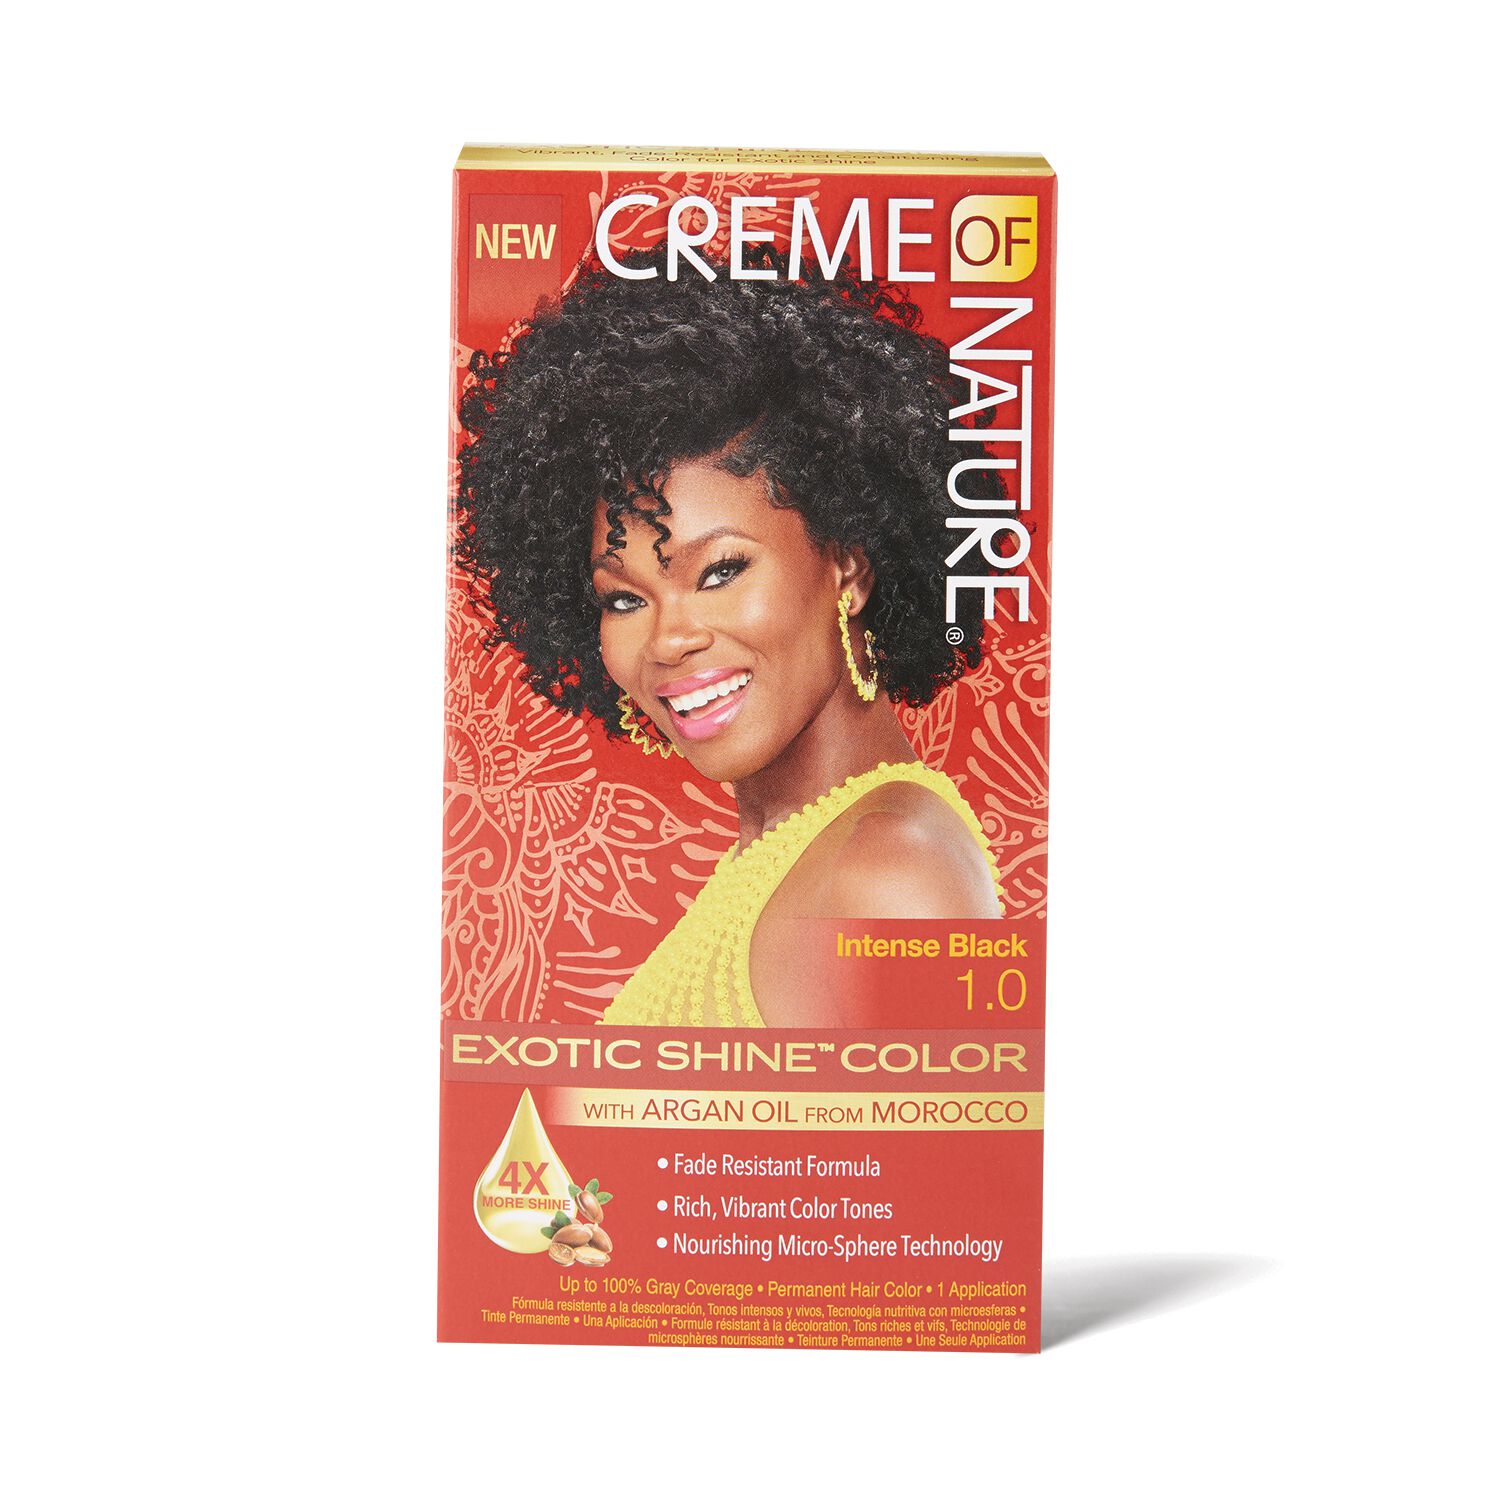 Exotic Shine Intense Black Permanent Hair Color by Creme of Nature ...